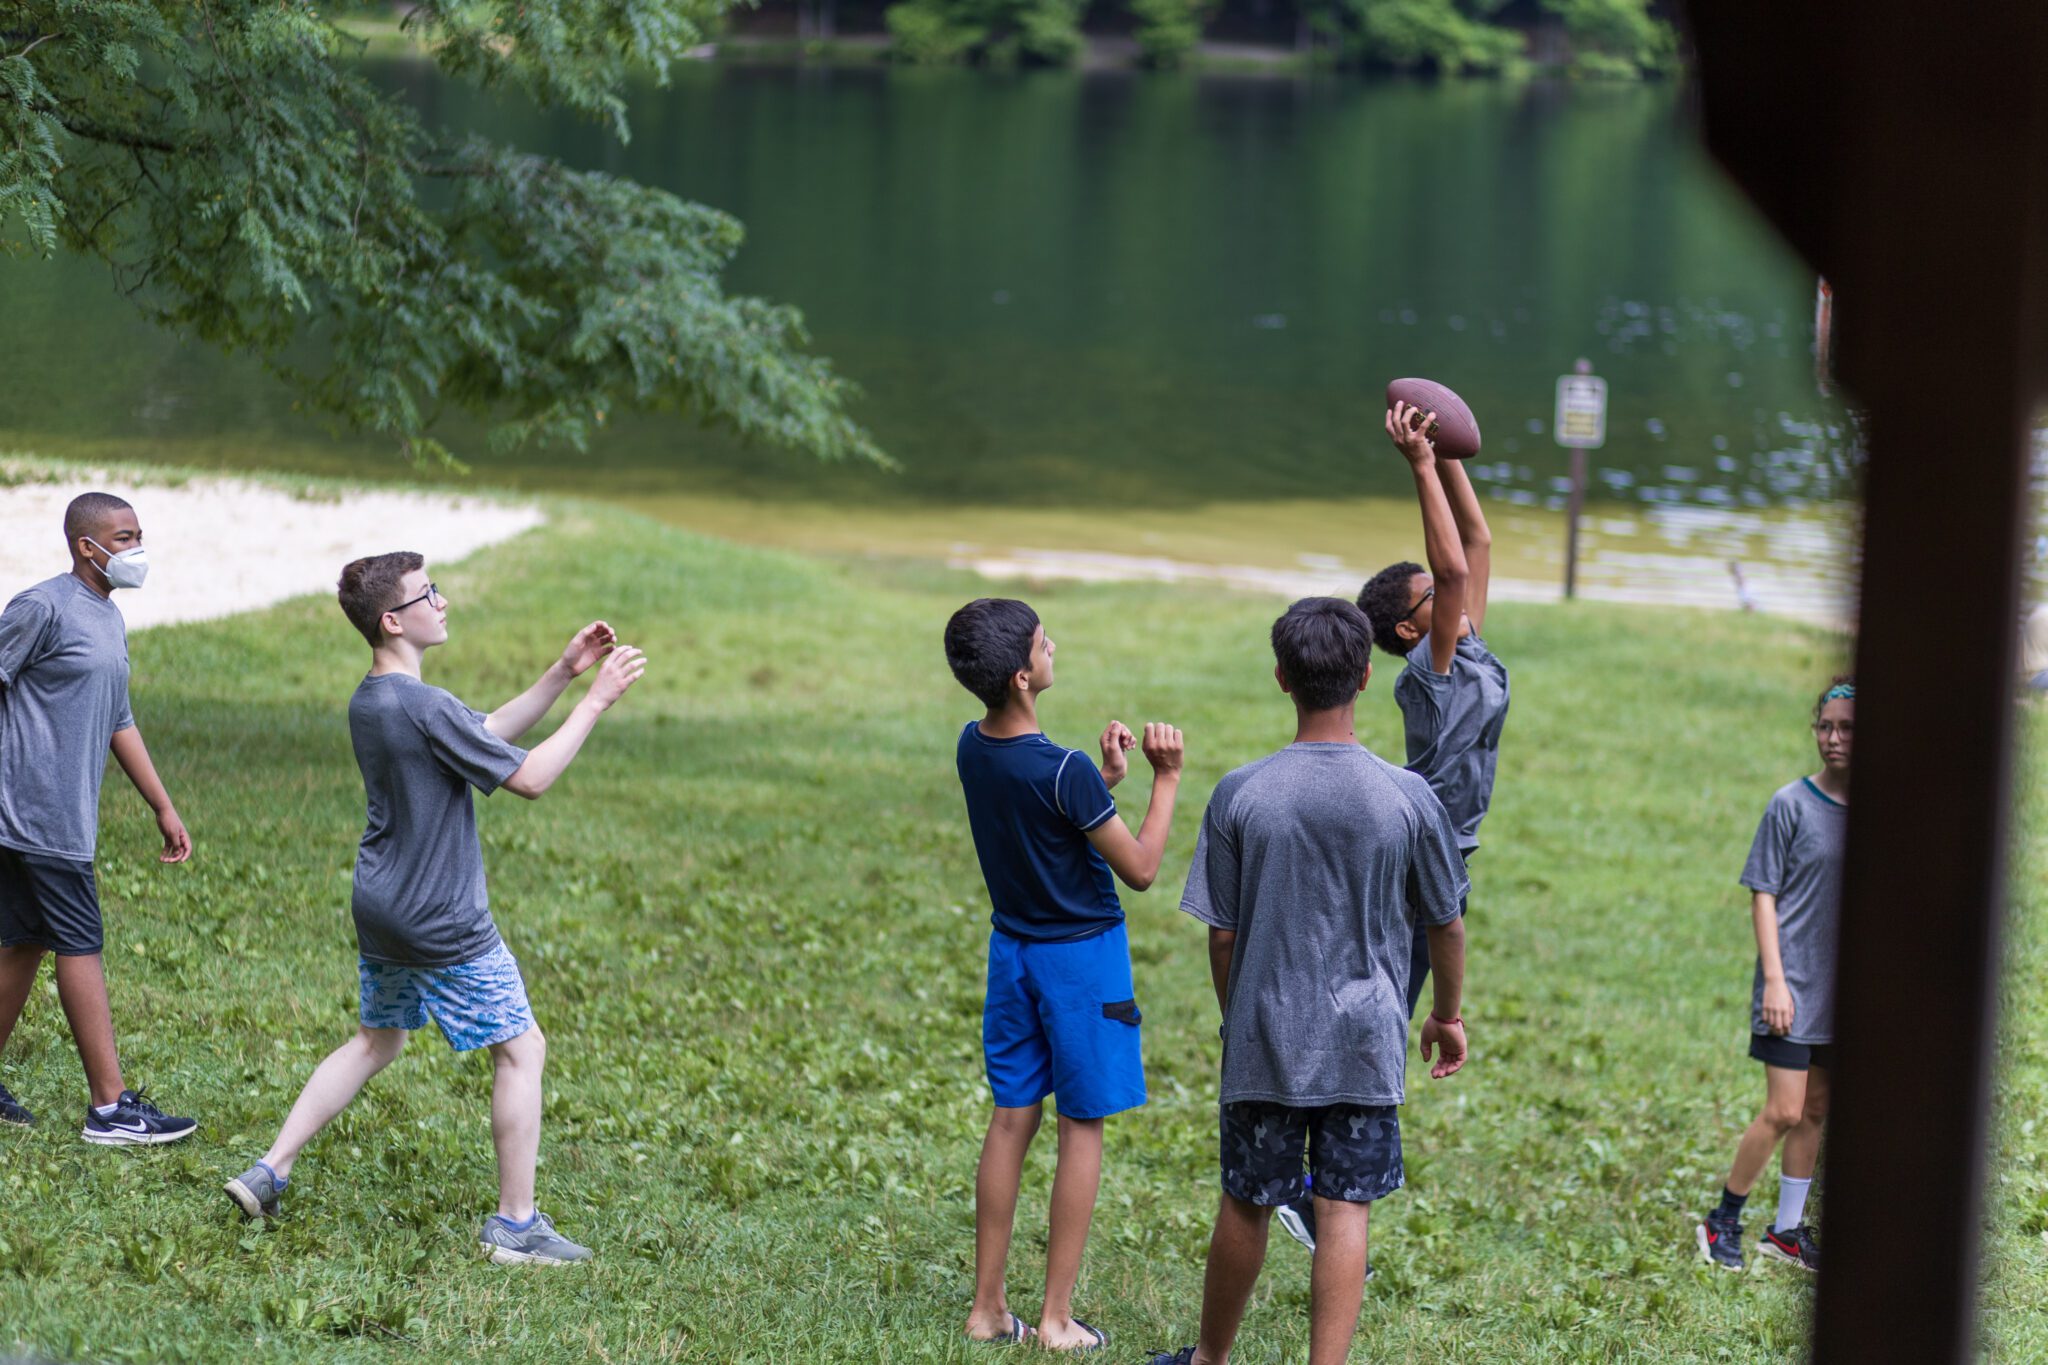 A group of boys participating in the P.L.E.D.G.E. Leadership Program, playing football in a grassy area near a lake.